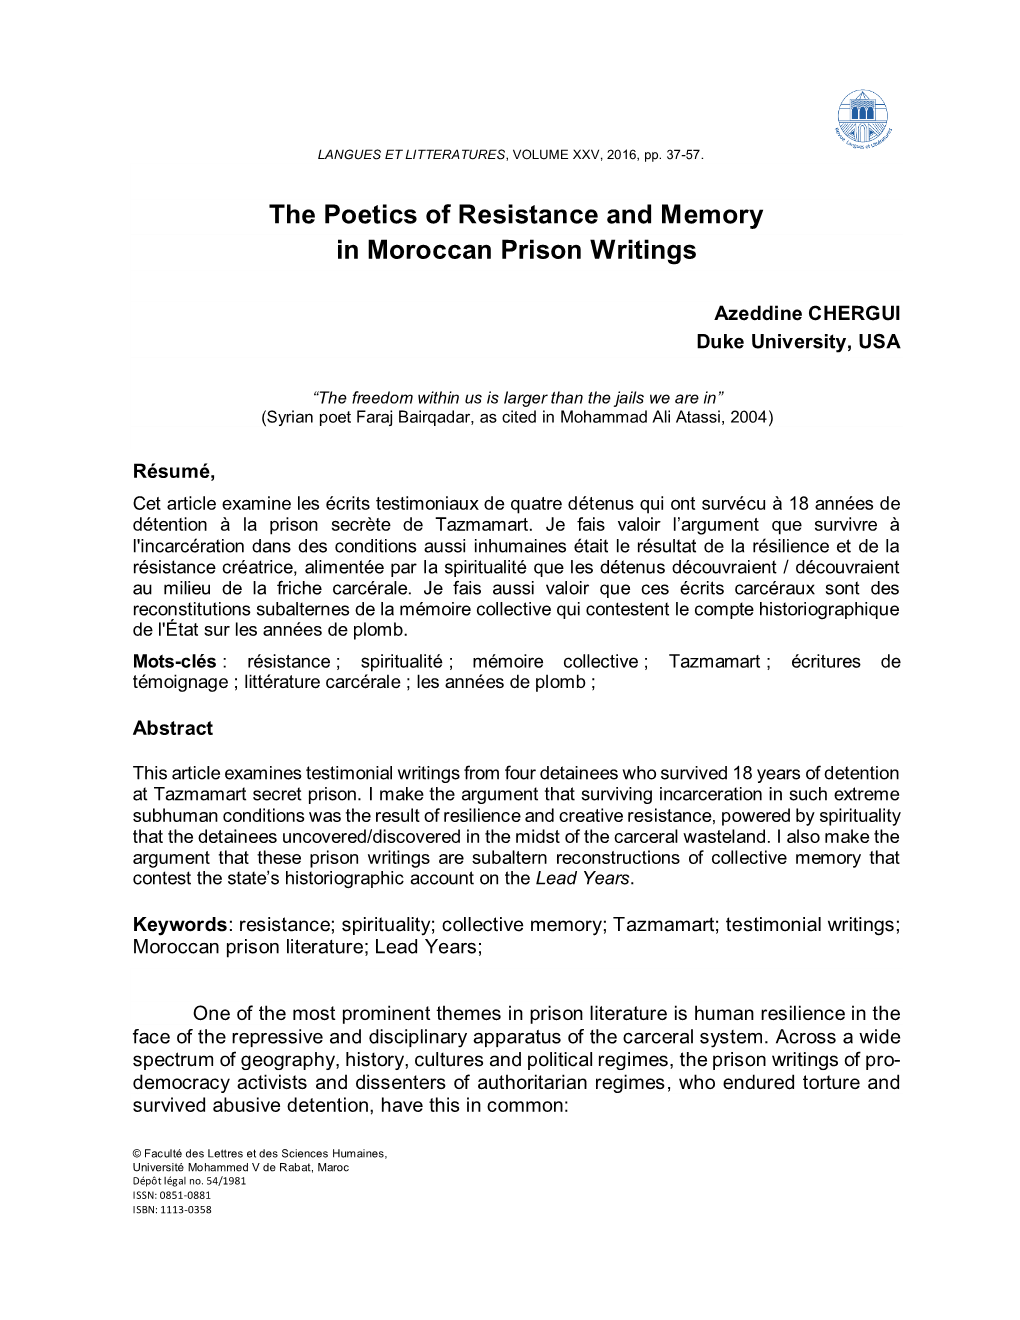 The Poetics of Resistance and Memory in Moroccan Prison Writings